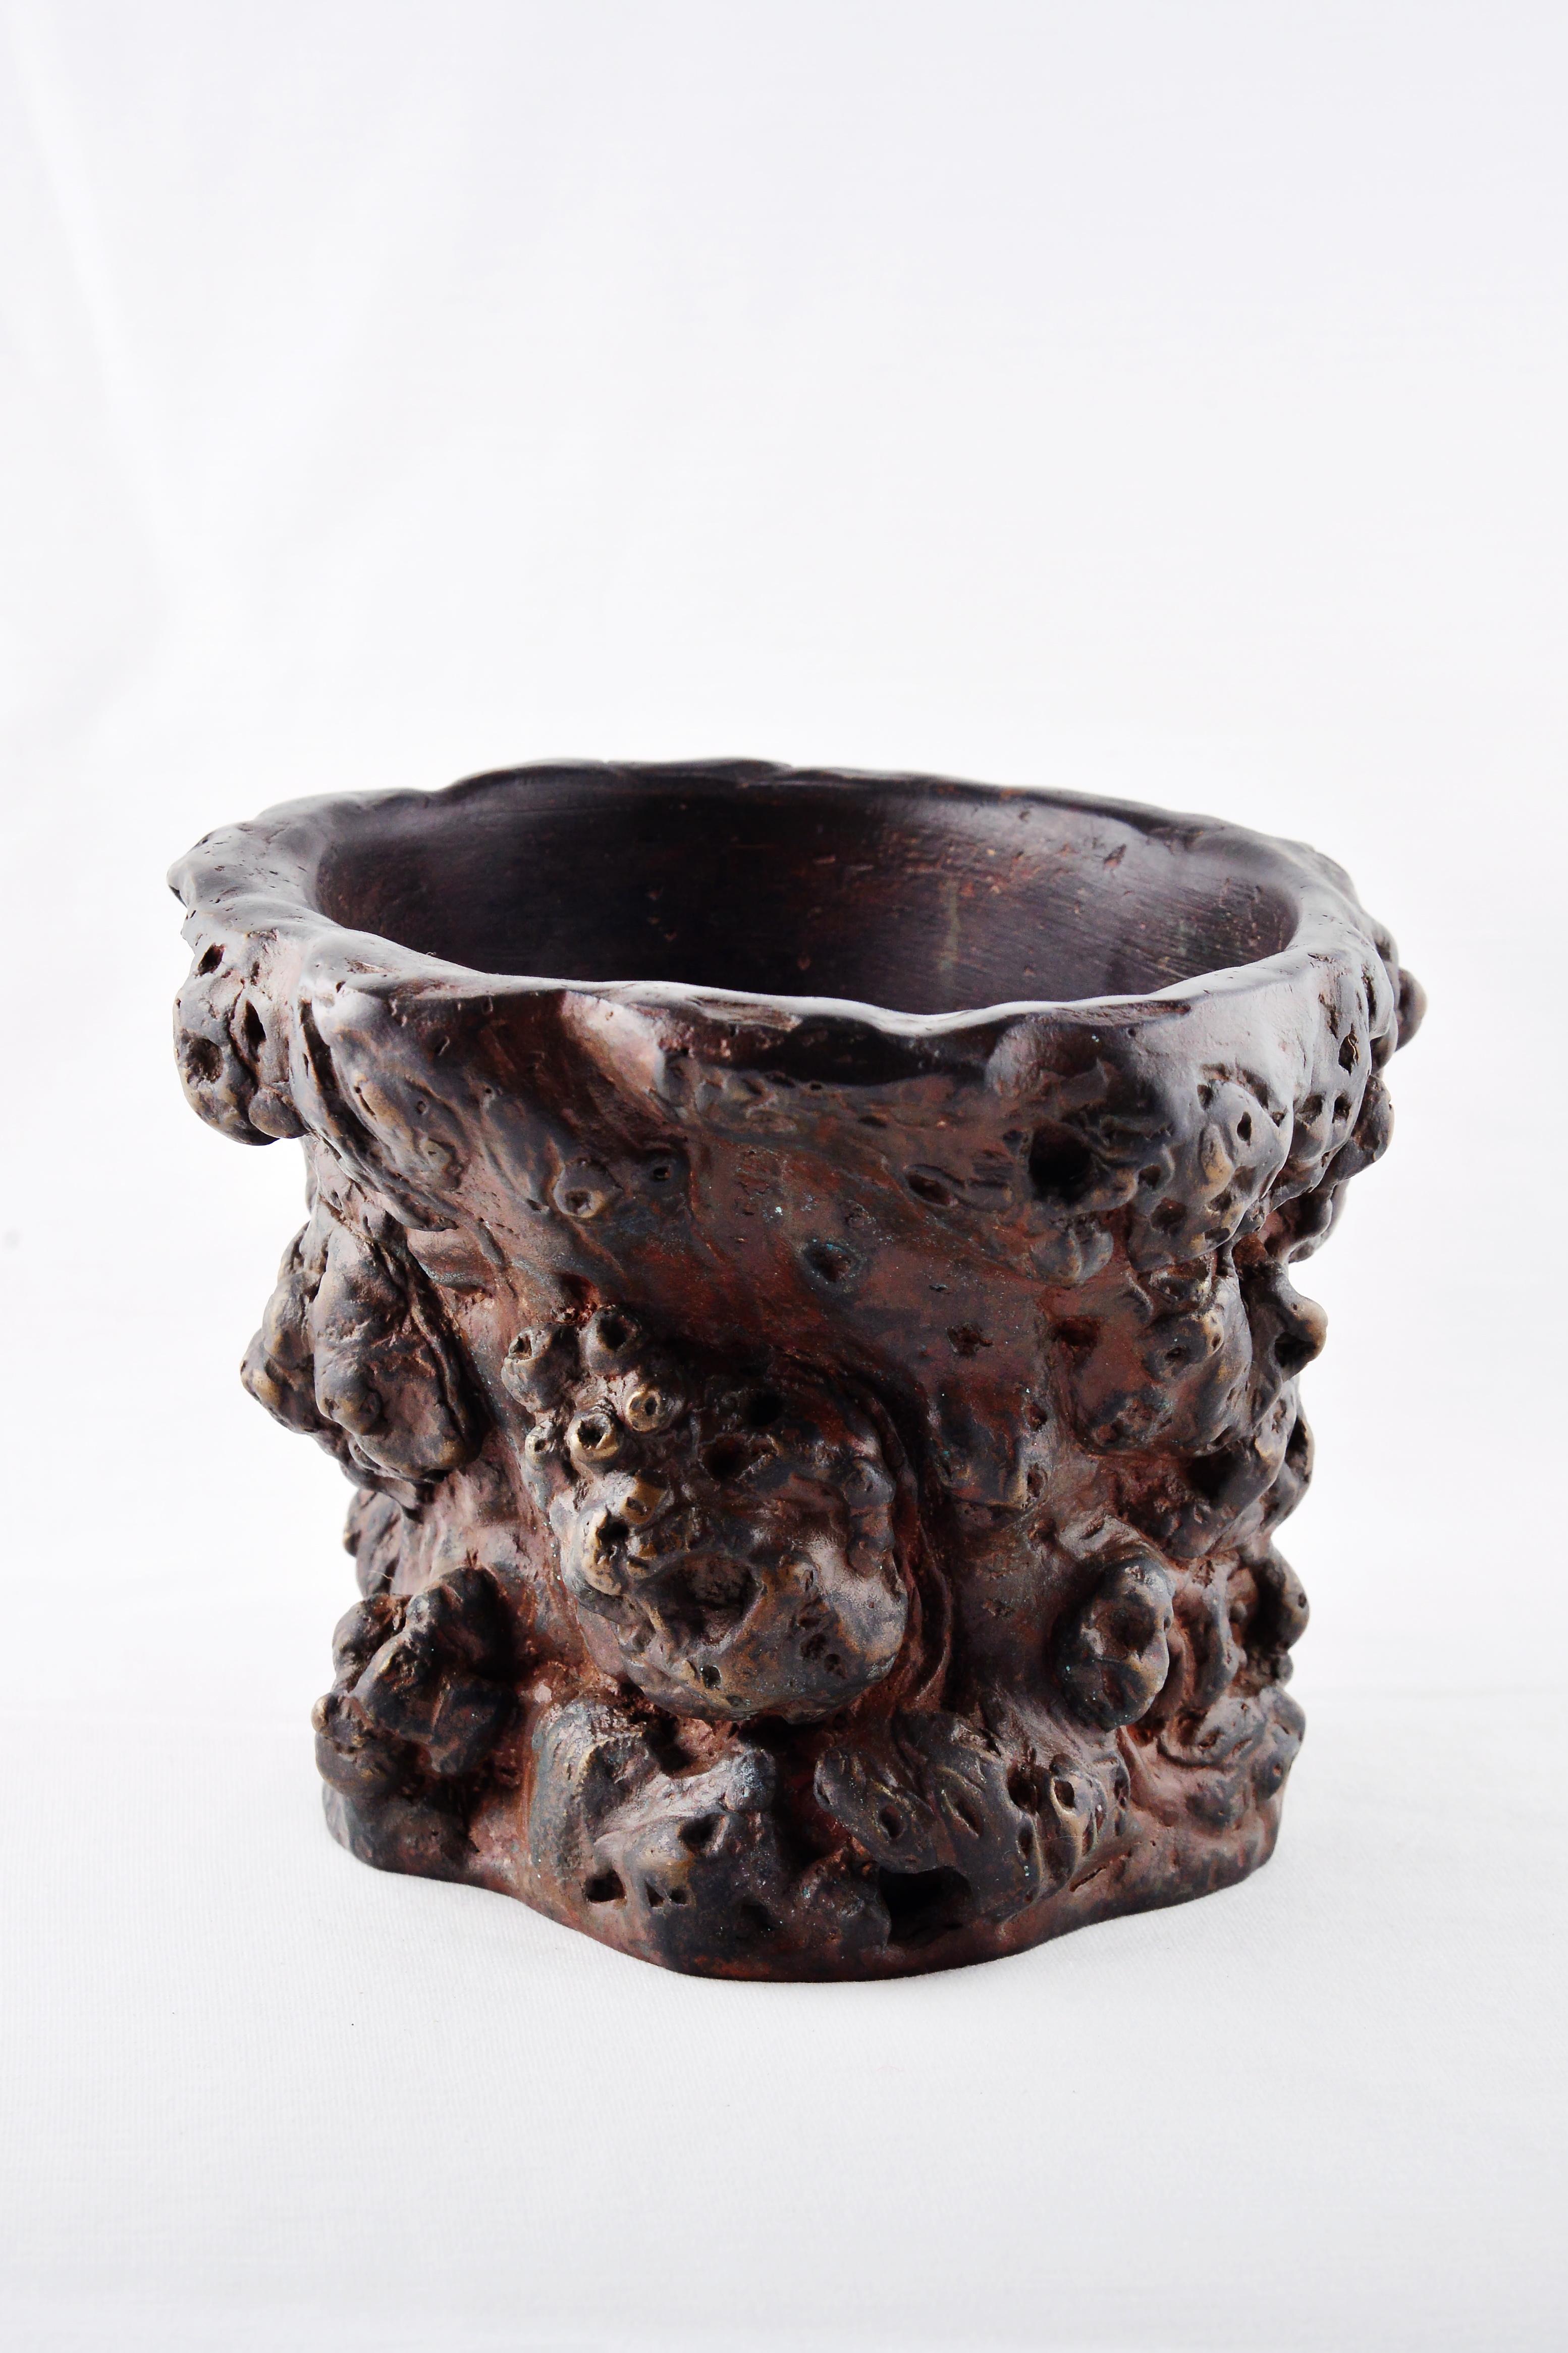 Bronze reproduction of a 17th Century Chinese Brush Pot by Armando Benato
Sand cast bronze, by Armando Benato
Dimension: Ø18.8 x 13.8 cm | 7.4 x 5.43 in
stamped with P.Tendercool logo at bottom.

Chinese brush pots hold a special place in the rich